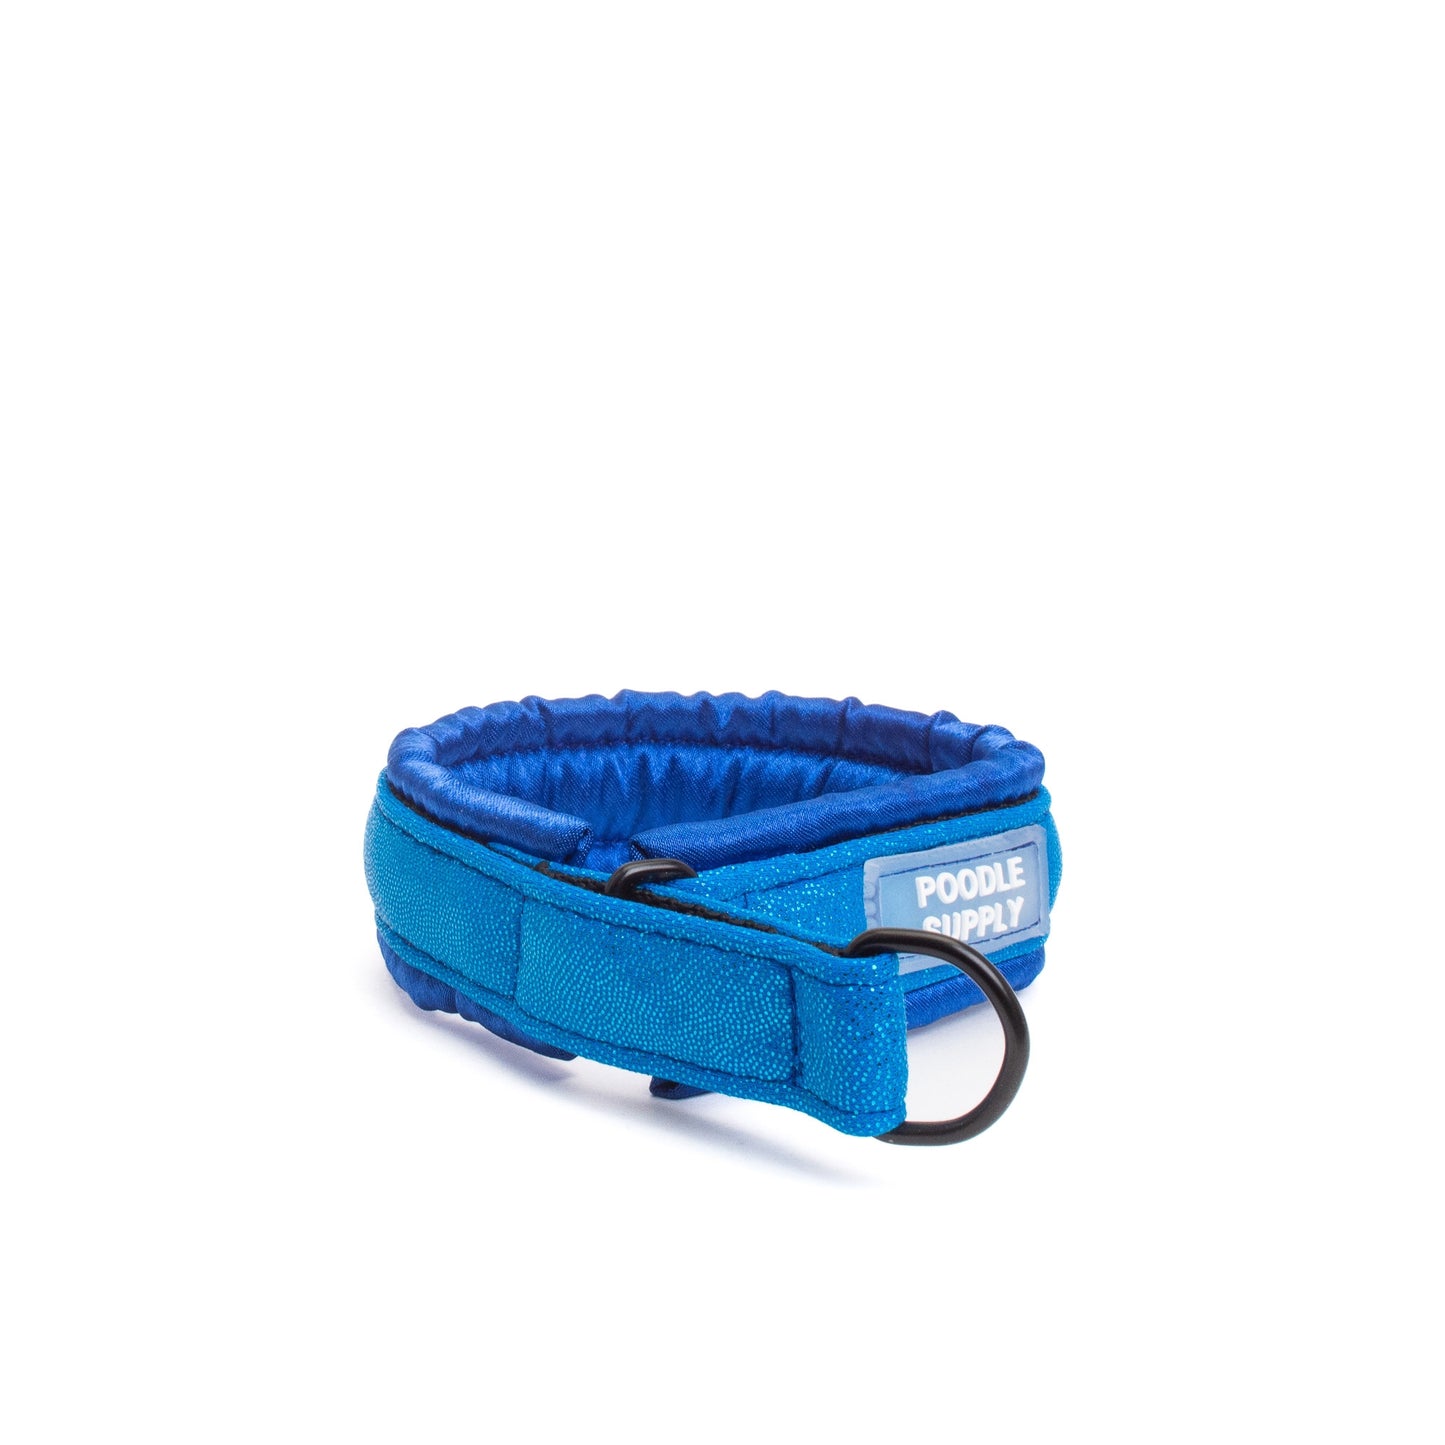 Small / Medium / Large Martingale Collar Poodle Supply Glossy Blue